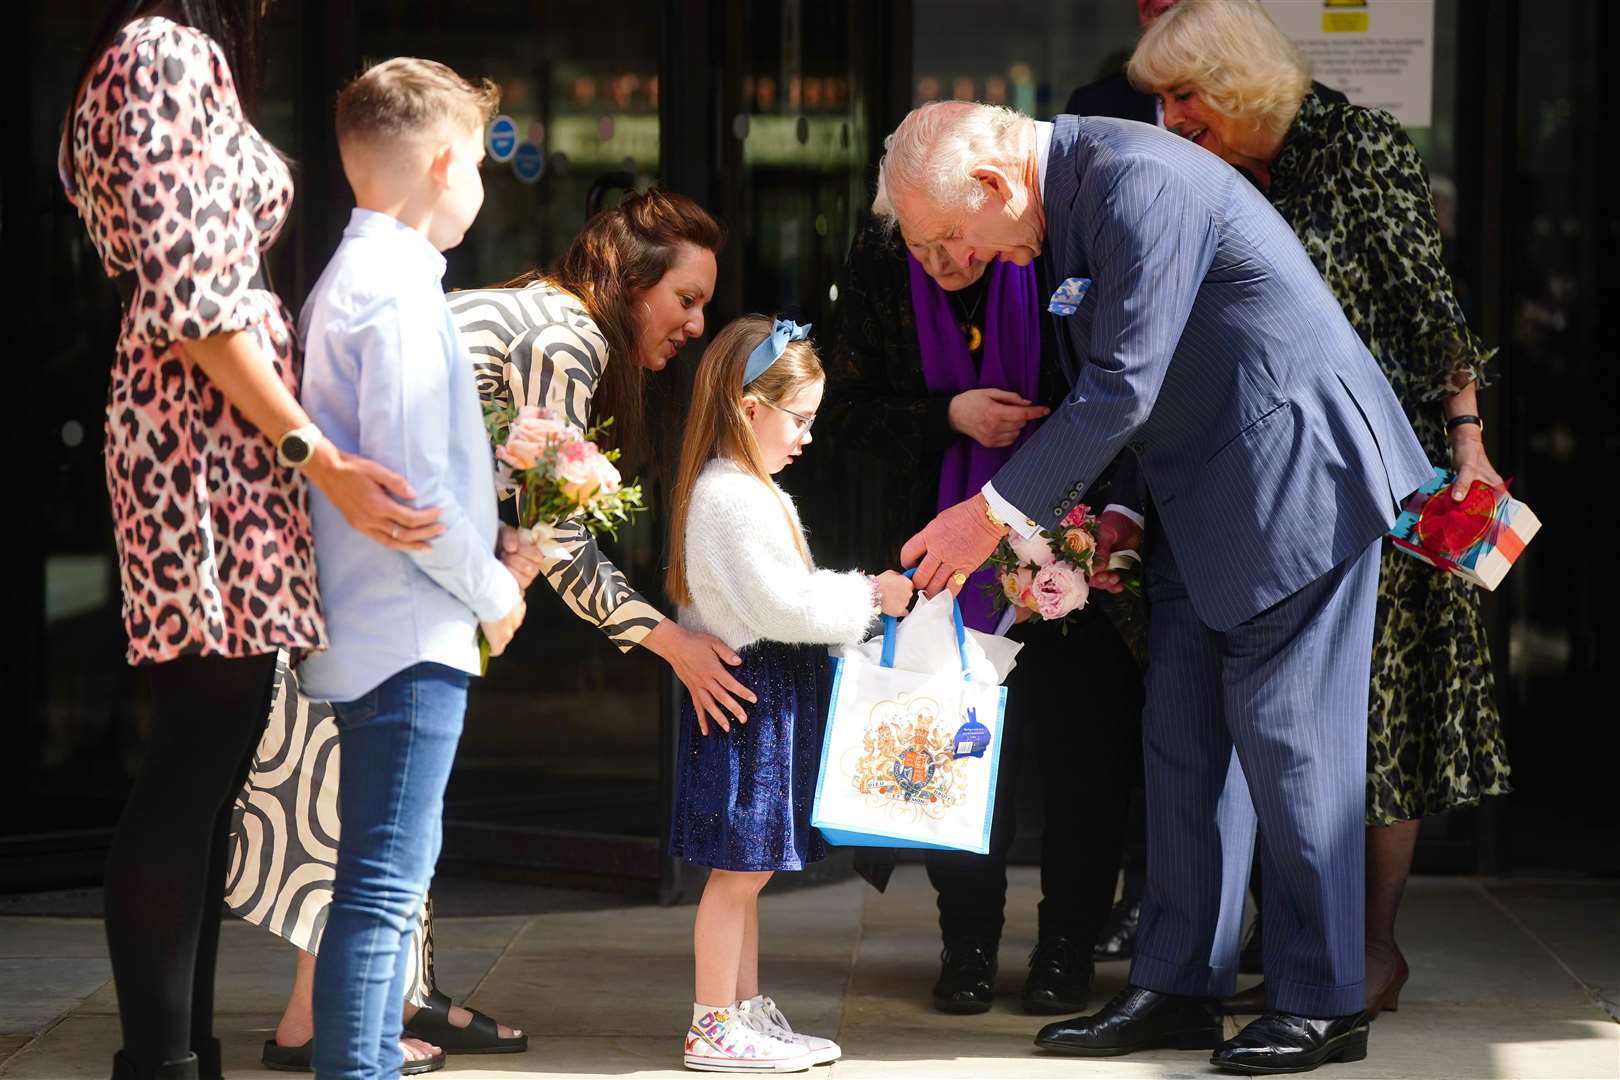 The King is presented with a bouquet as he leaves following a visit to University College Hospital Macmillan Cancer Centre in London (Victoria Jones/PA)[